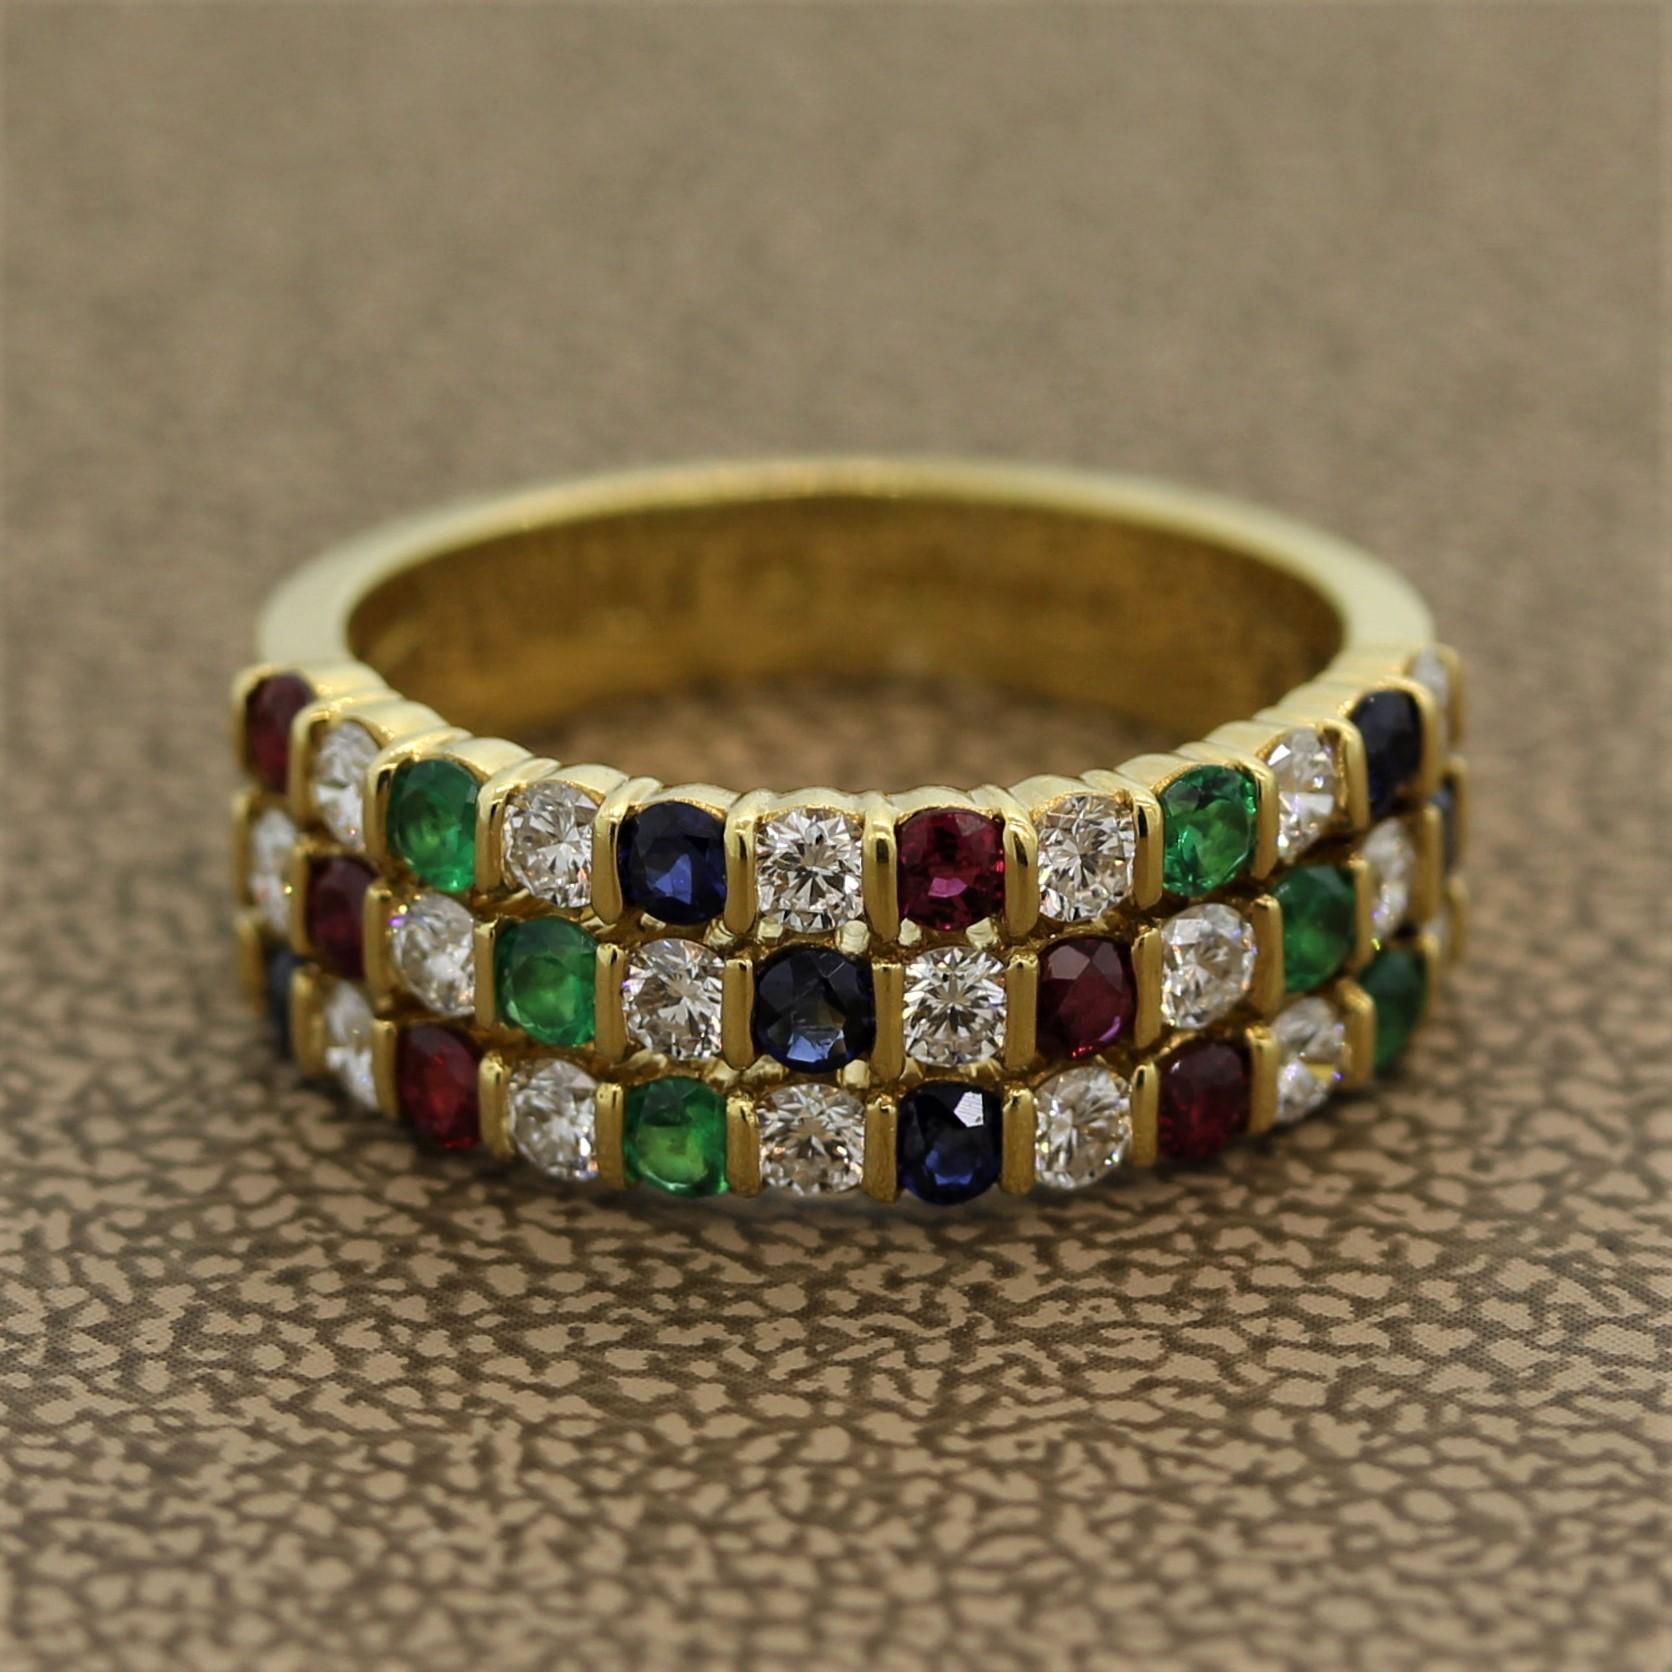 A sweet and colorfully designed ring by Gemlok. It features 1.00 carat of round brilliant cut diamonds along with 0.99 carats of emeralds, rubies, and sapphires which are all round cuts. Made in 18k yellow gold with extra fine stones.

Ring Size 6